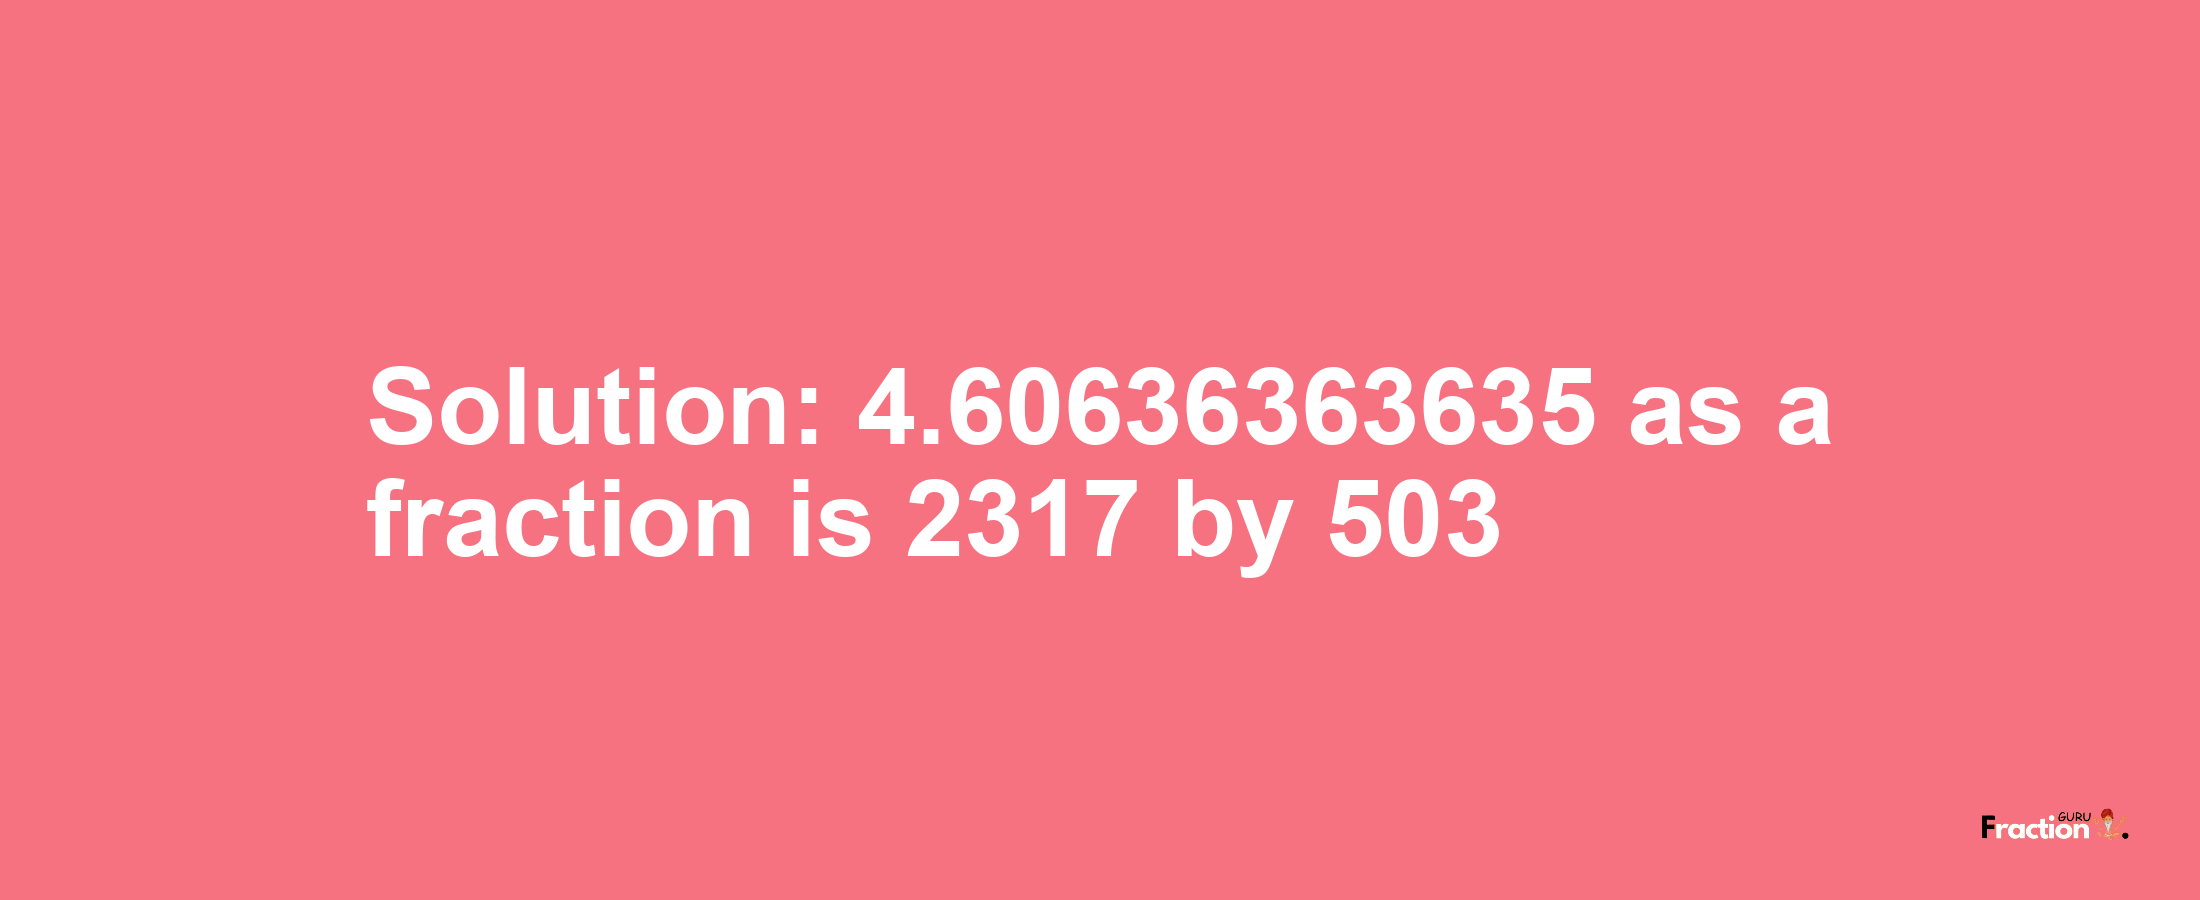 Solution:4.60636363635 as a fraction is 2317/503